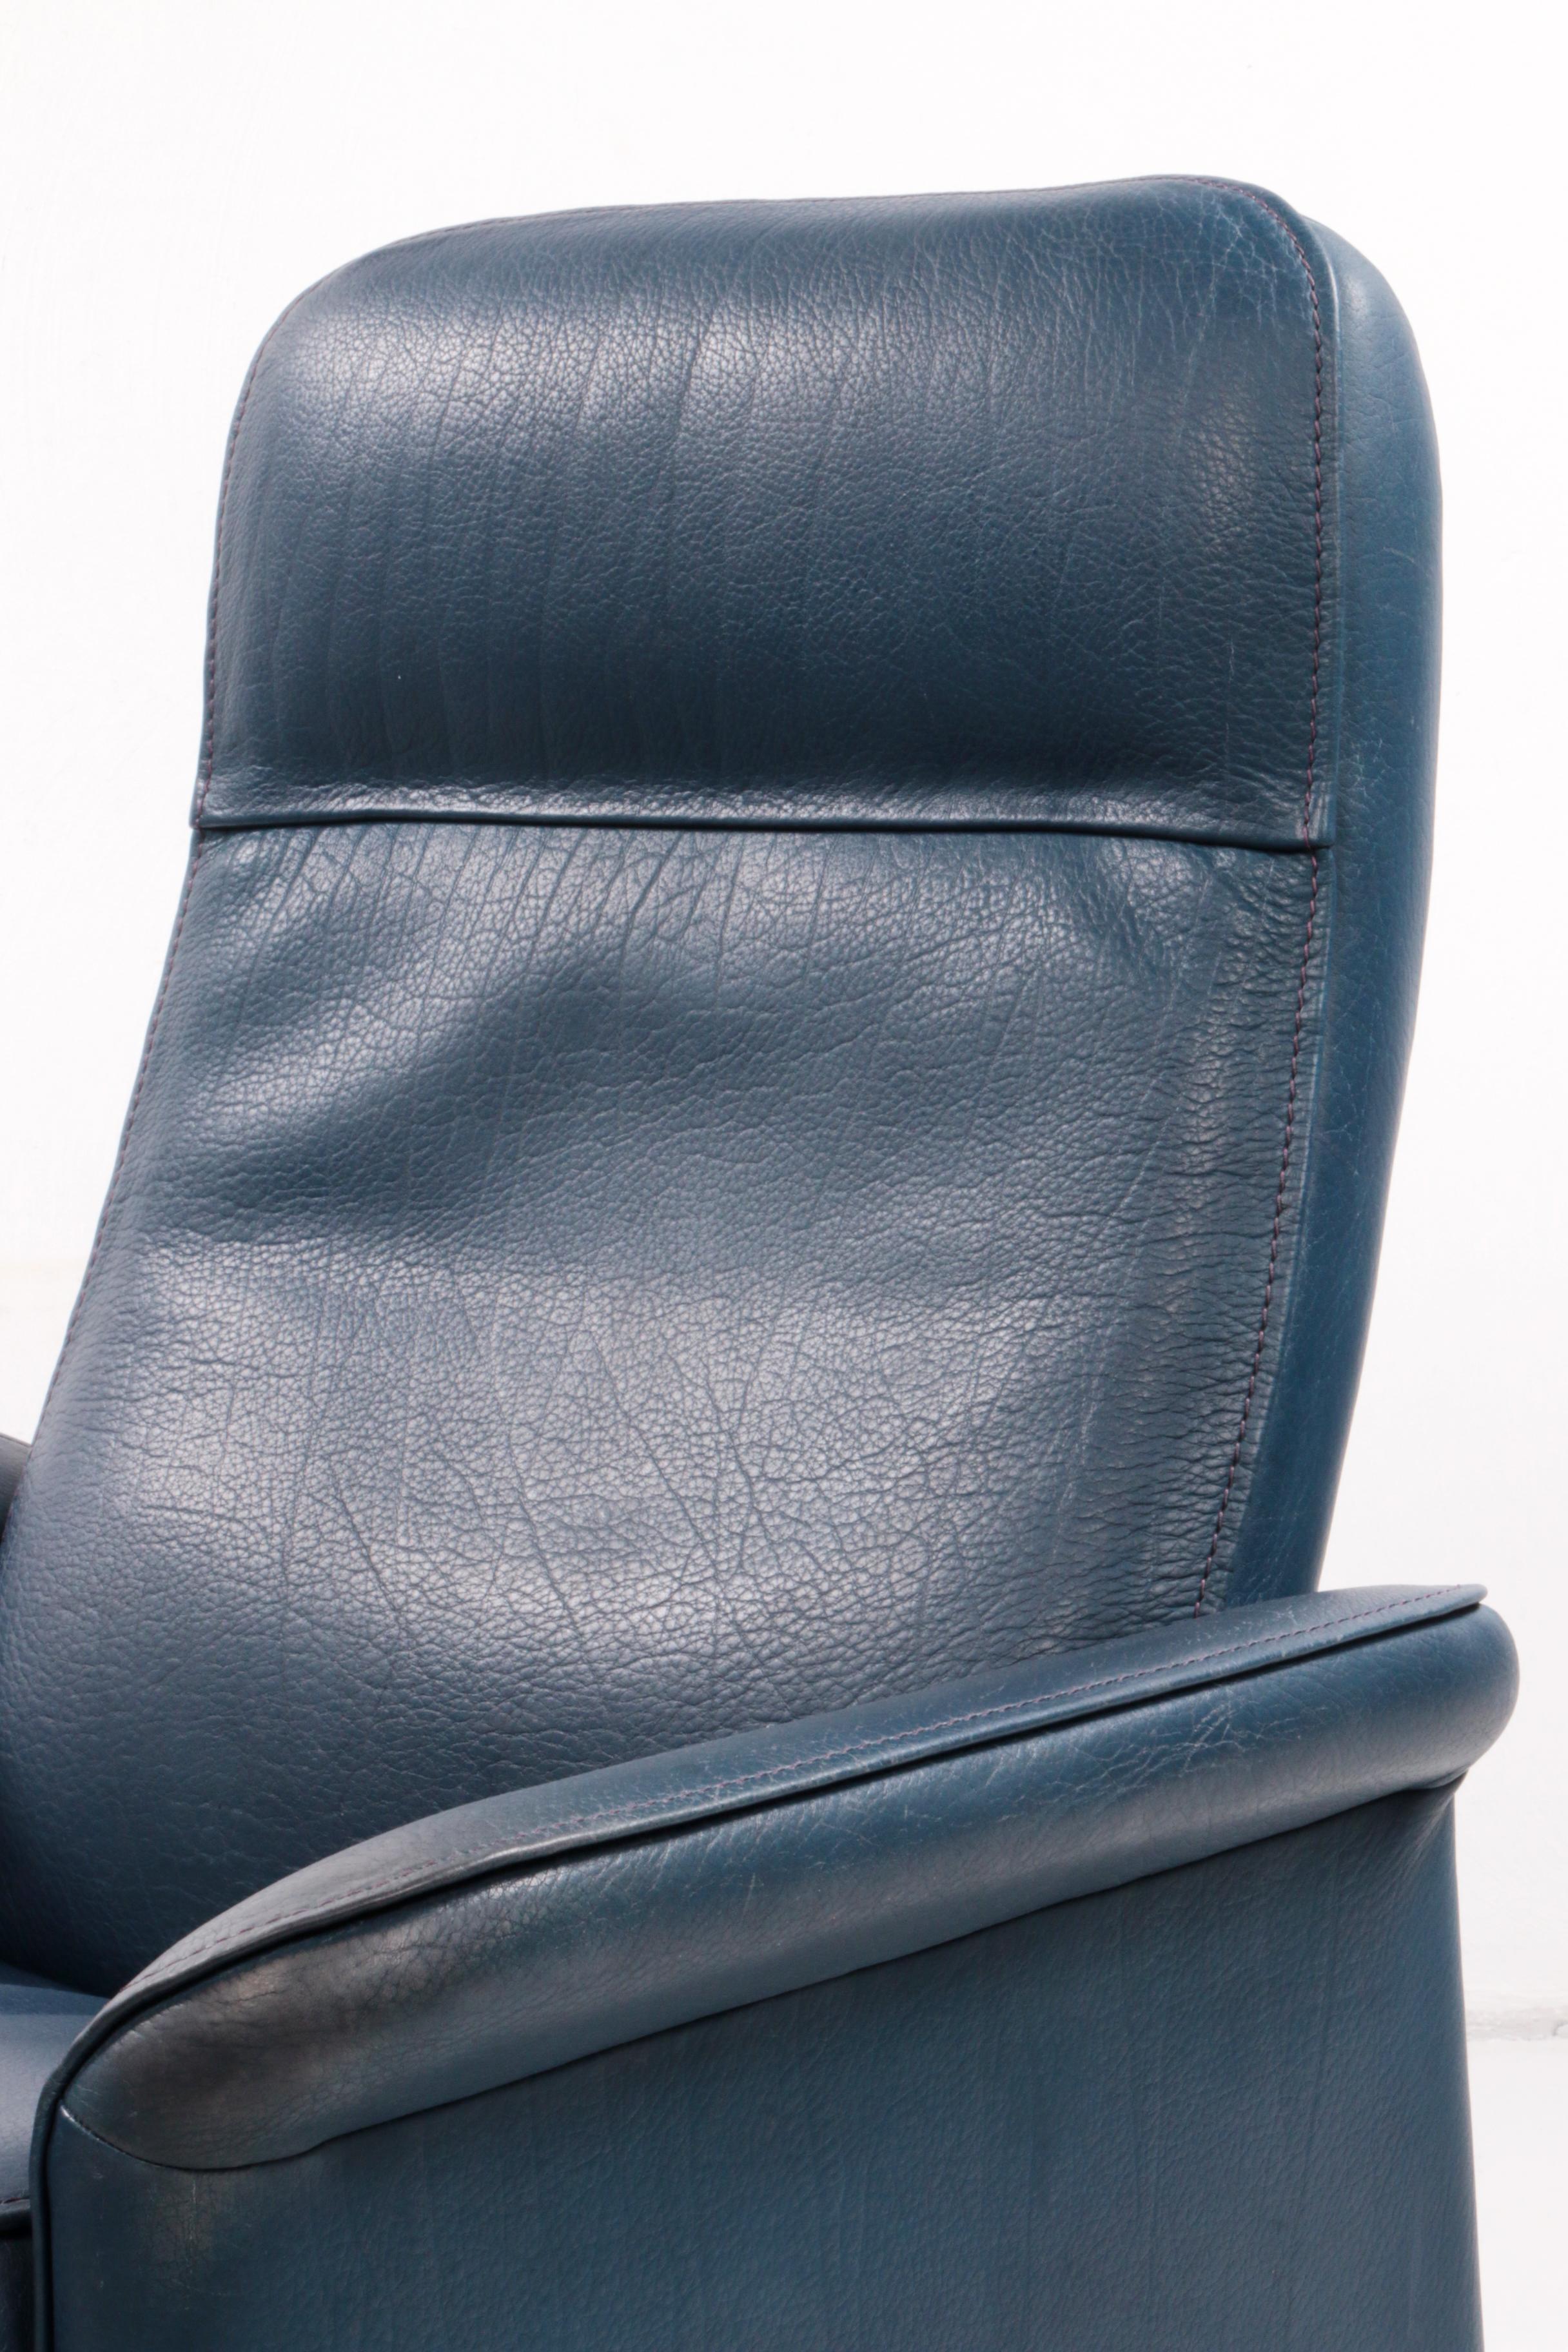 De Sede Ds 50 Relax Armchair with Hocker Leather Petrol Colour, 1980 Switzerland 4